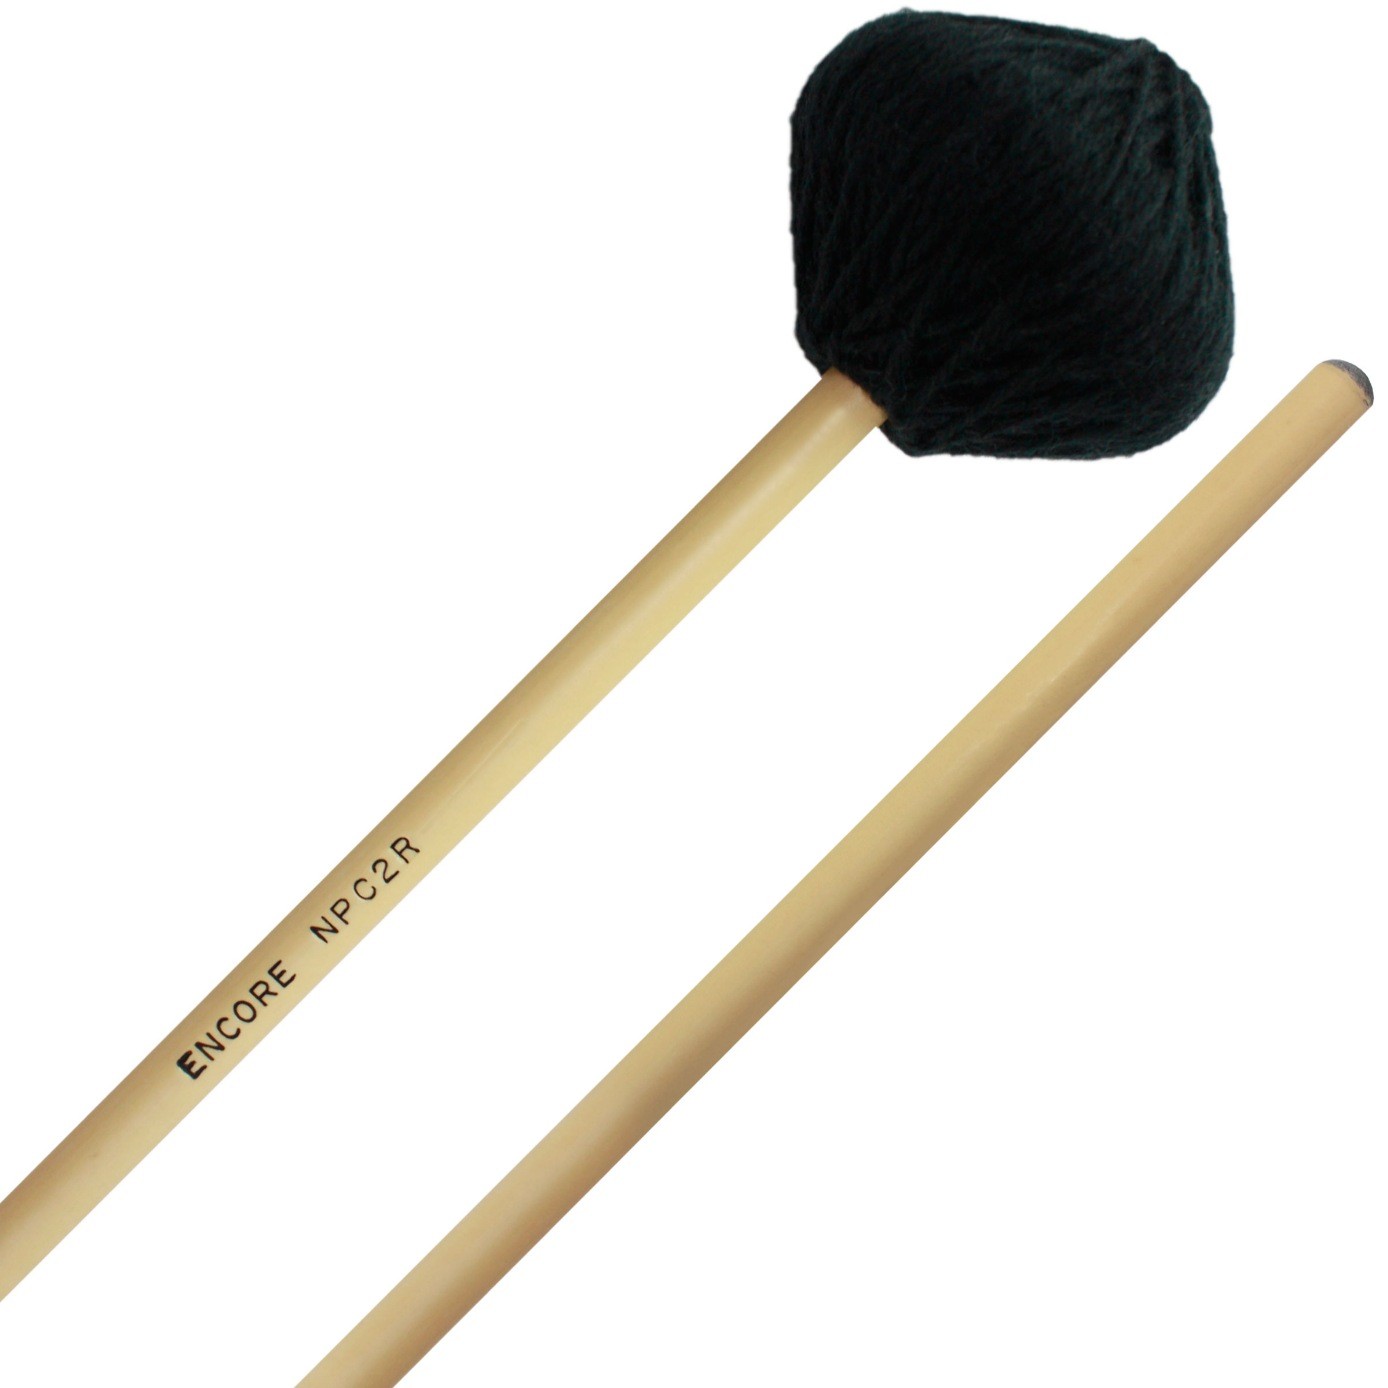 Encore Nick Petrella General Suspended Cymbal Mallets